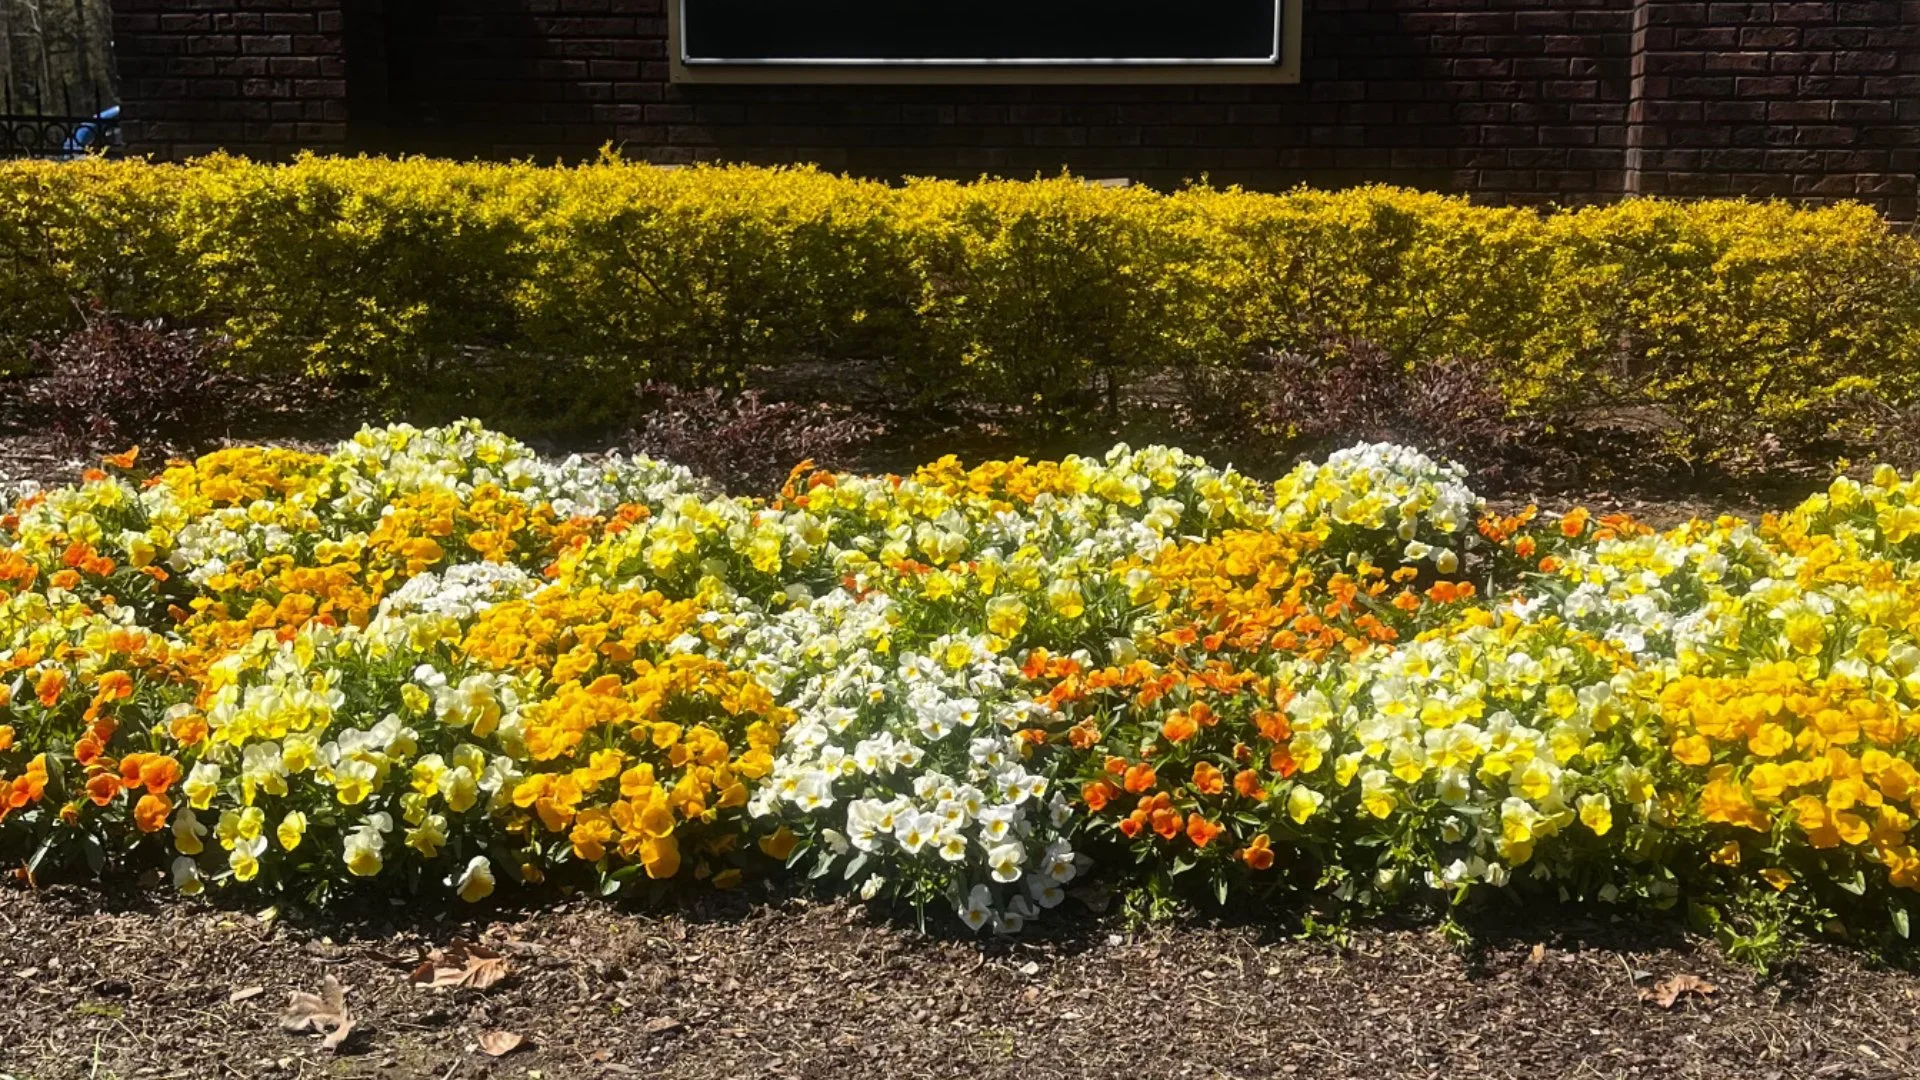 Things to Consider When Adding Fall Annual Flowers to Your Landscape Beds